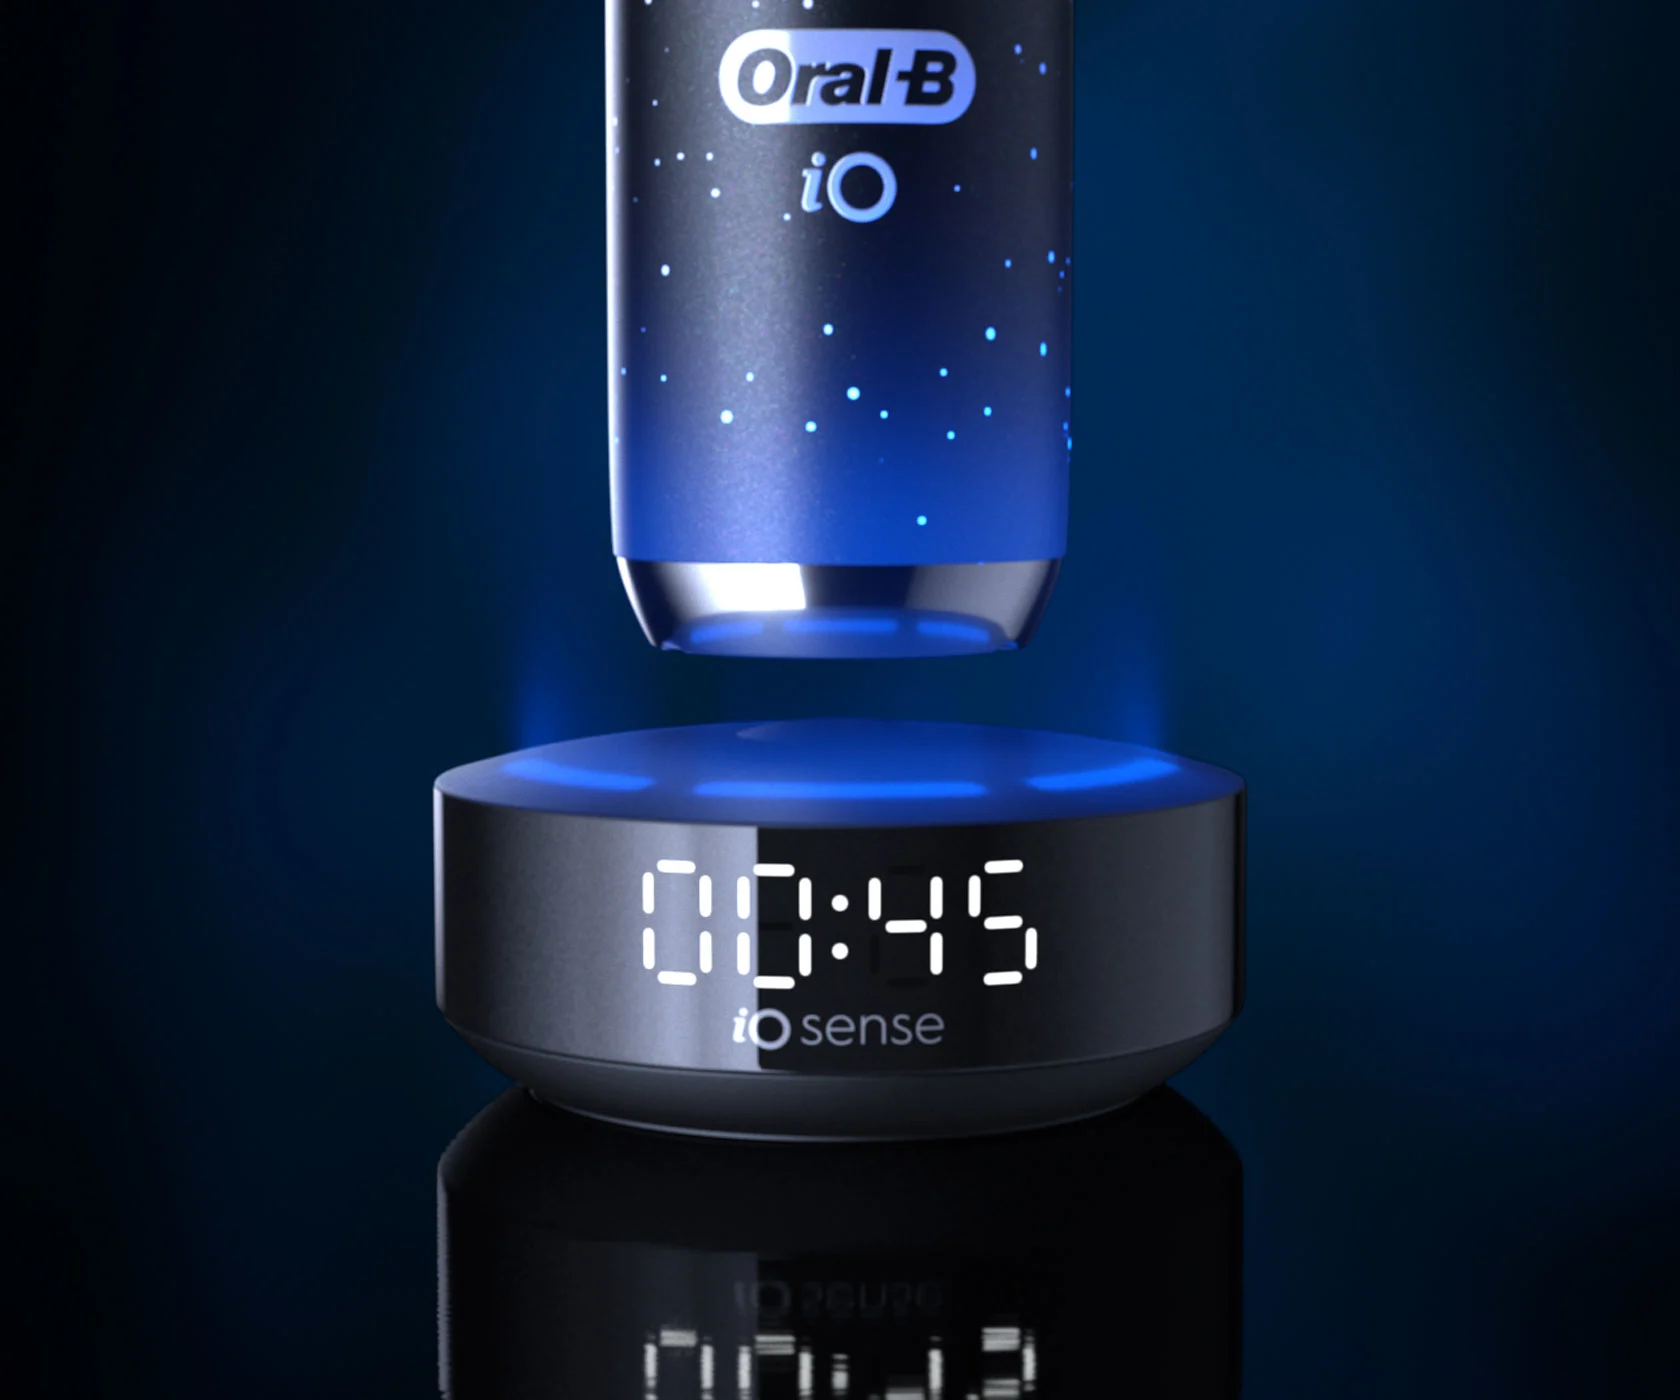 Black Oral-B iO Series 10 toothbrush on charging stand 